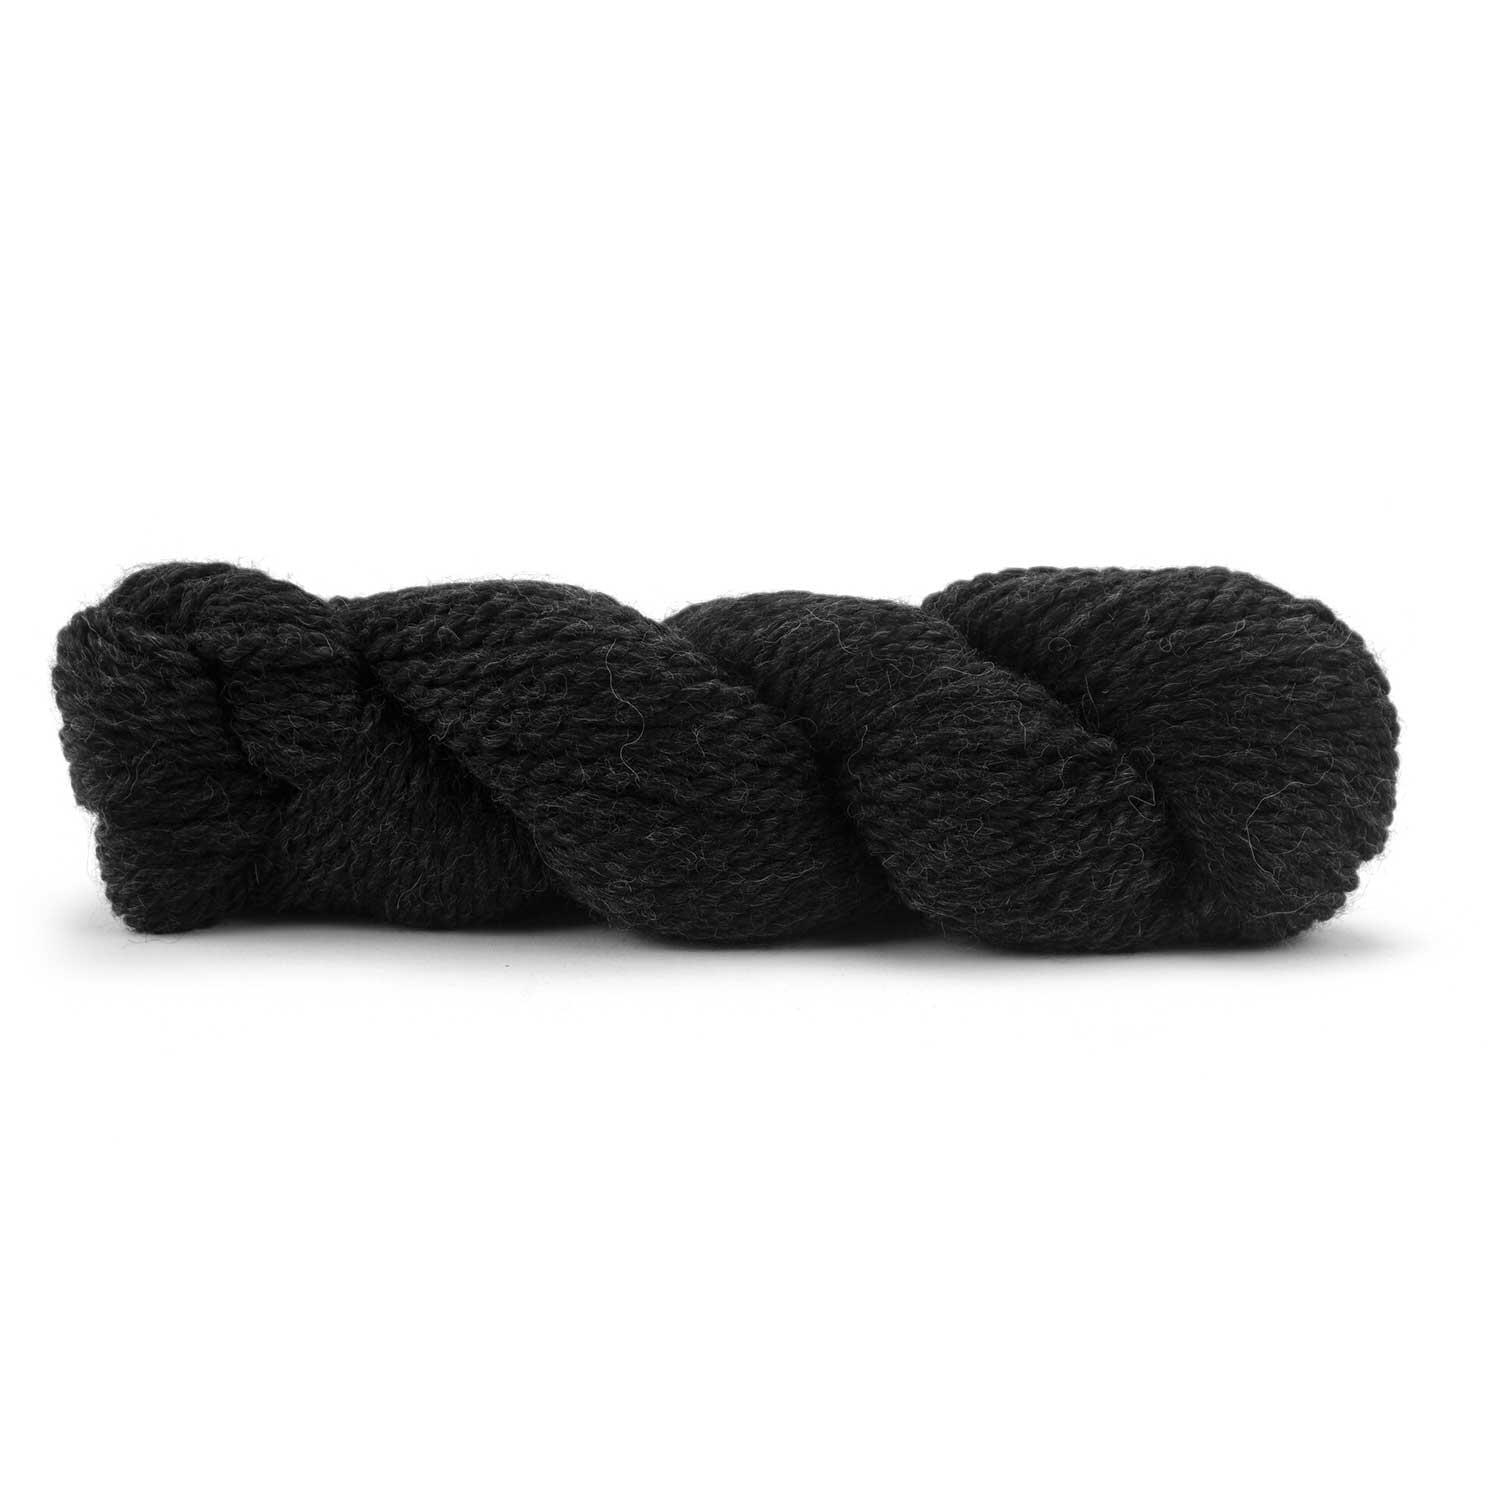 Pascuali Baby Alpaca Los Andes 100g Farbe: 075 Anthrazit